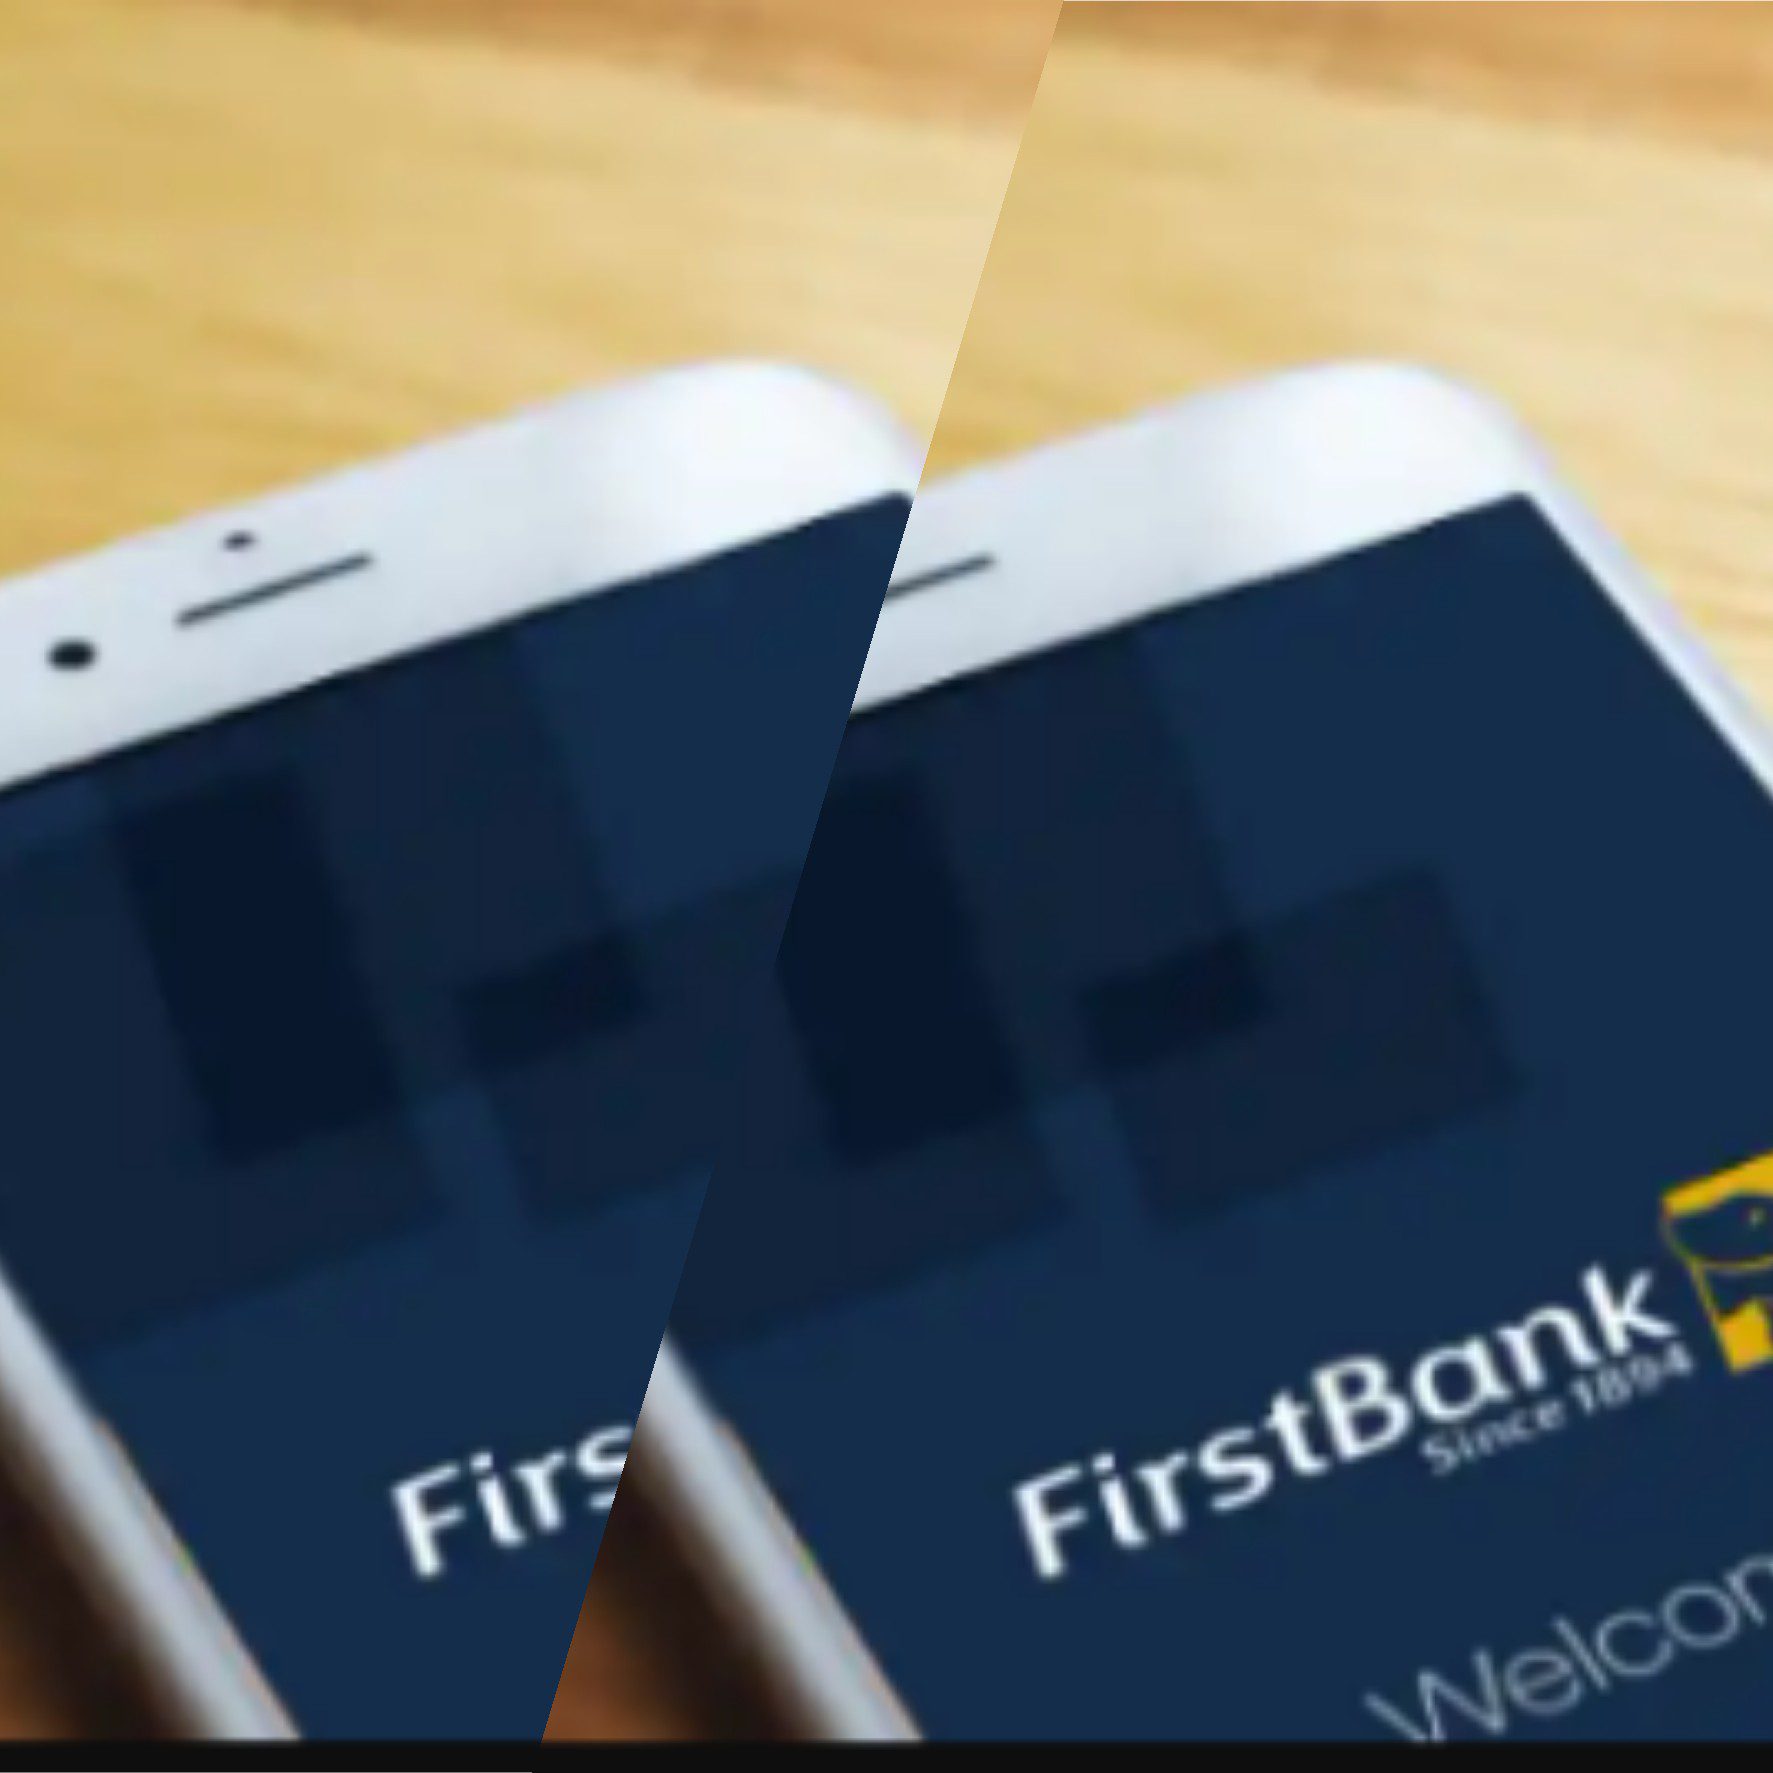 FirstBank Shines In Global Banking/Finance Awards 2021